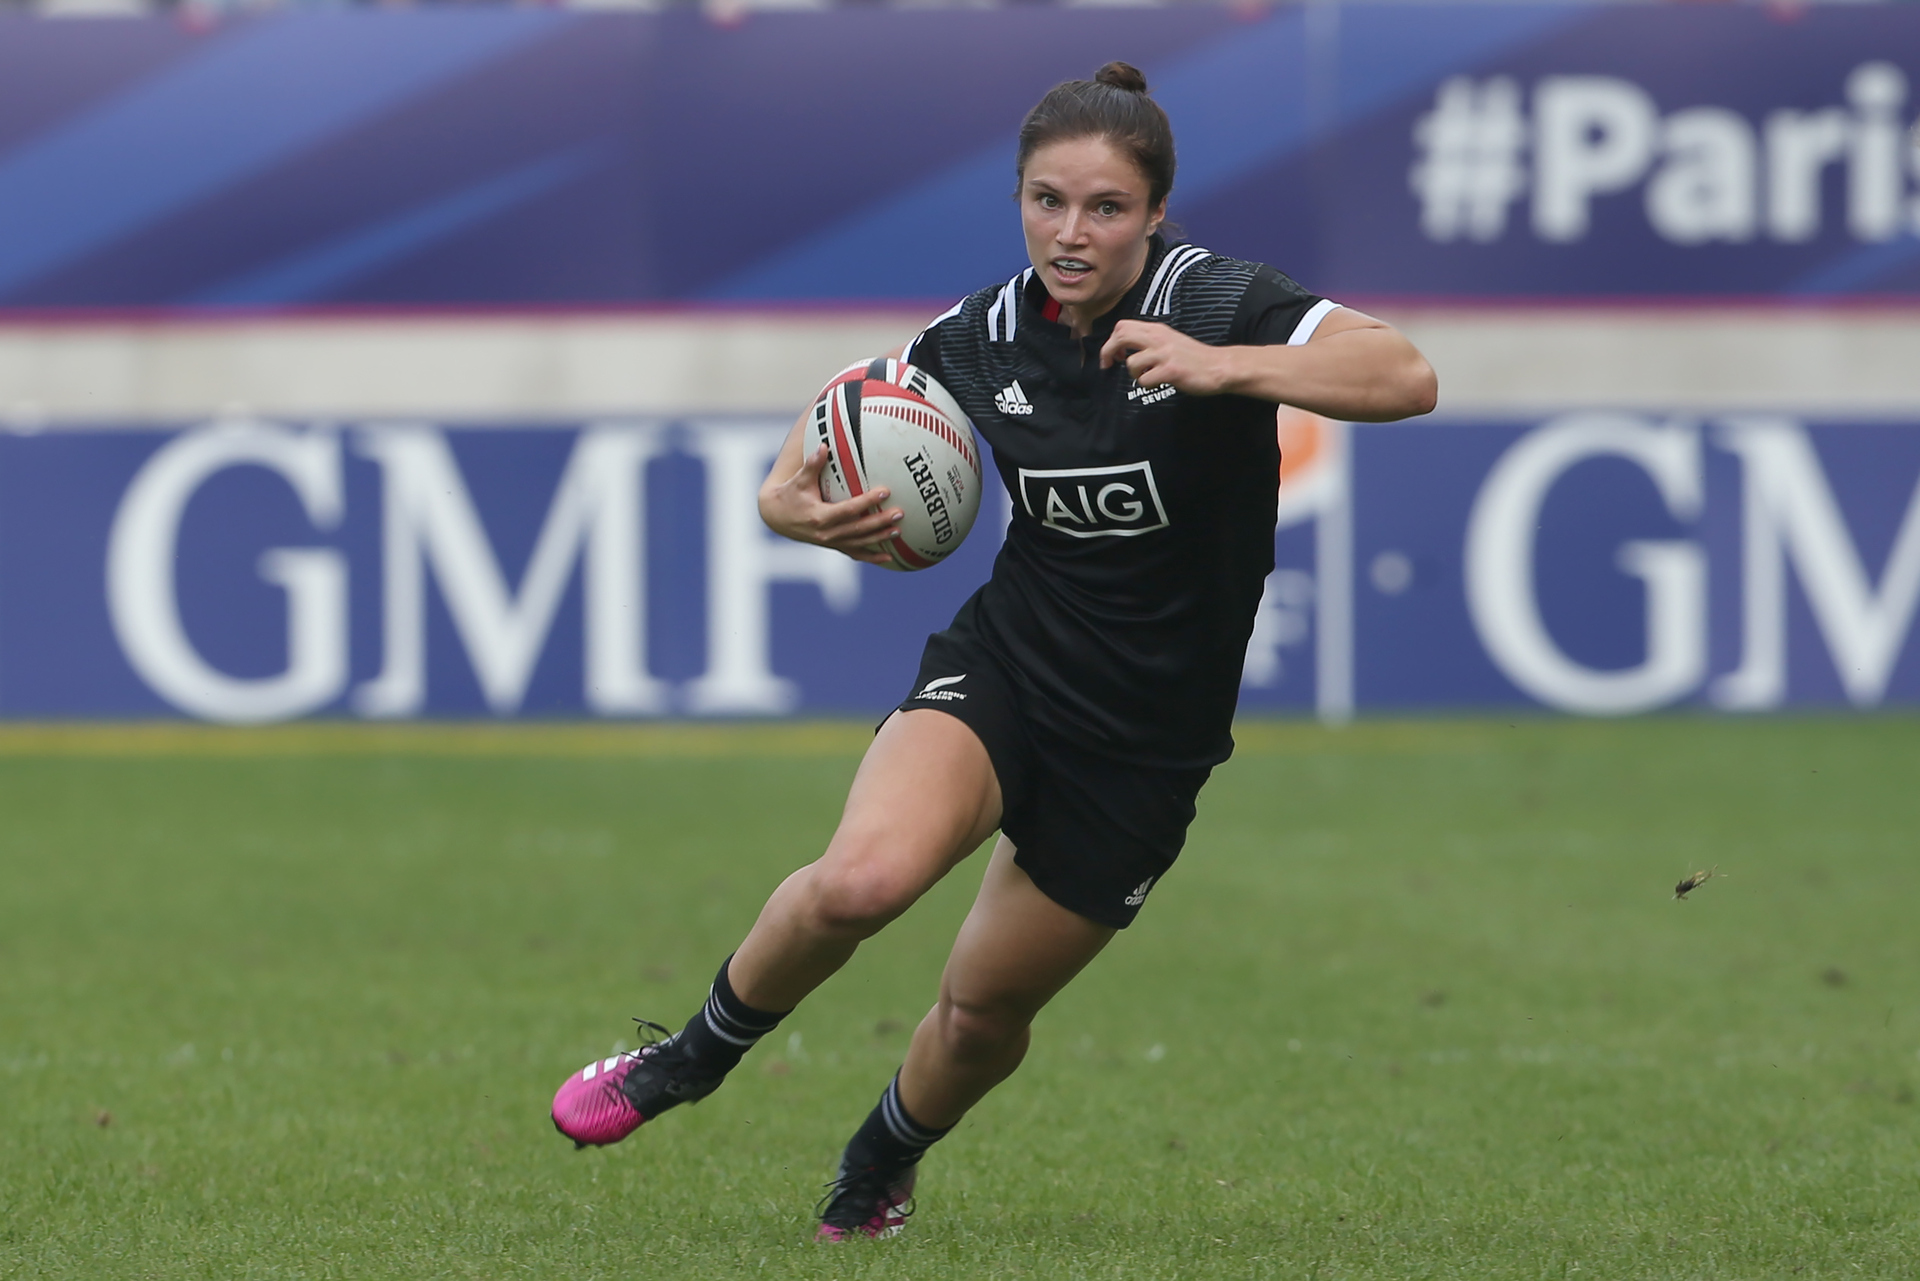 Rugby Totally unfair - Black Ferns star Michaela Blyde slams lack of TV coverage of womens rugby